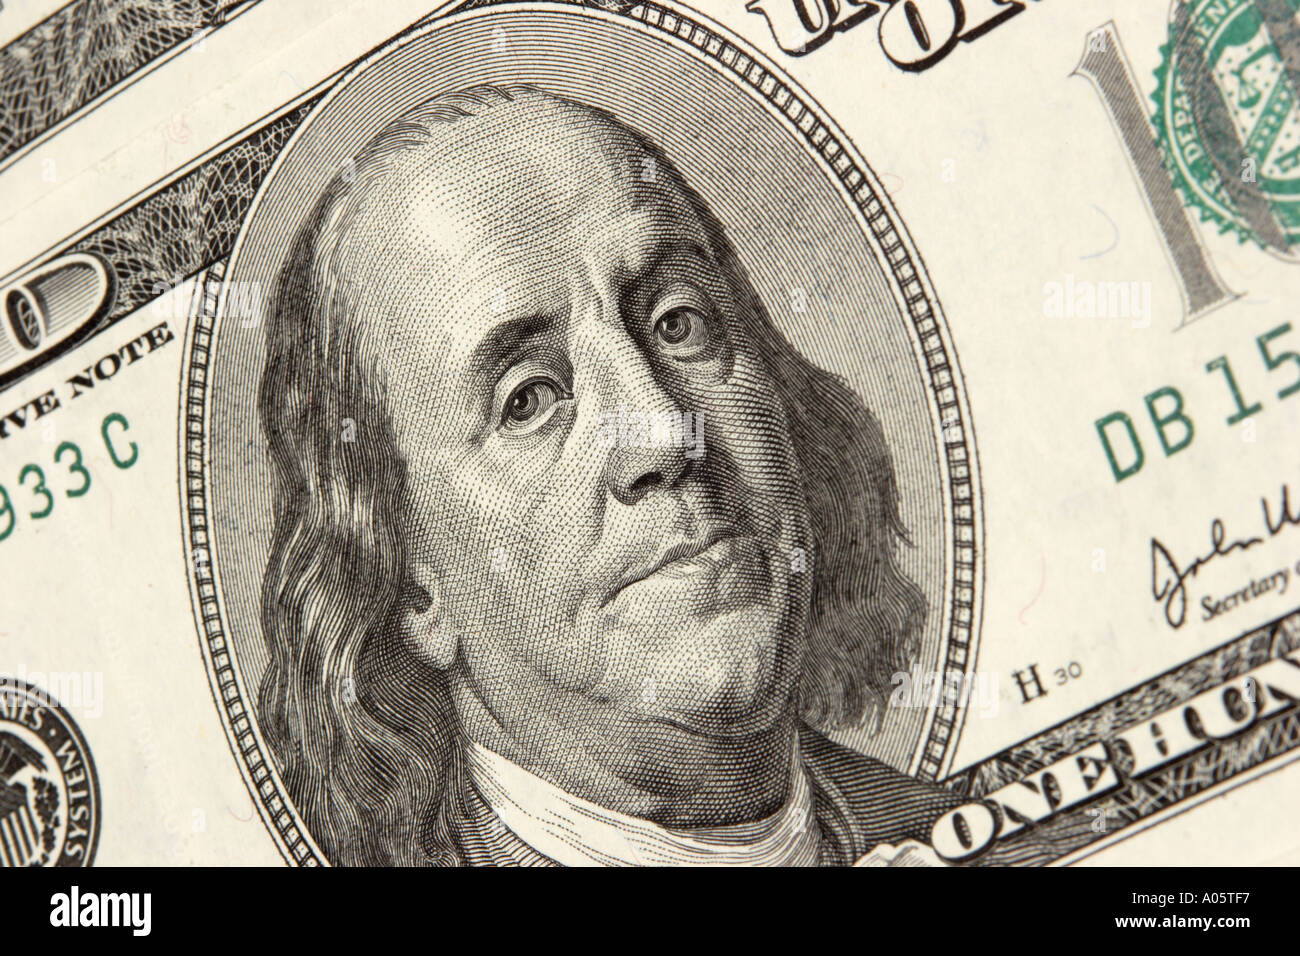 Money USA American currency face of Benjamin Franklin on hundred dollar  bill Stock Photo - Alamy